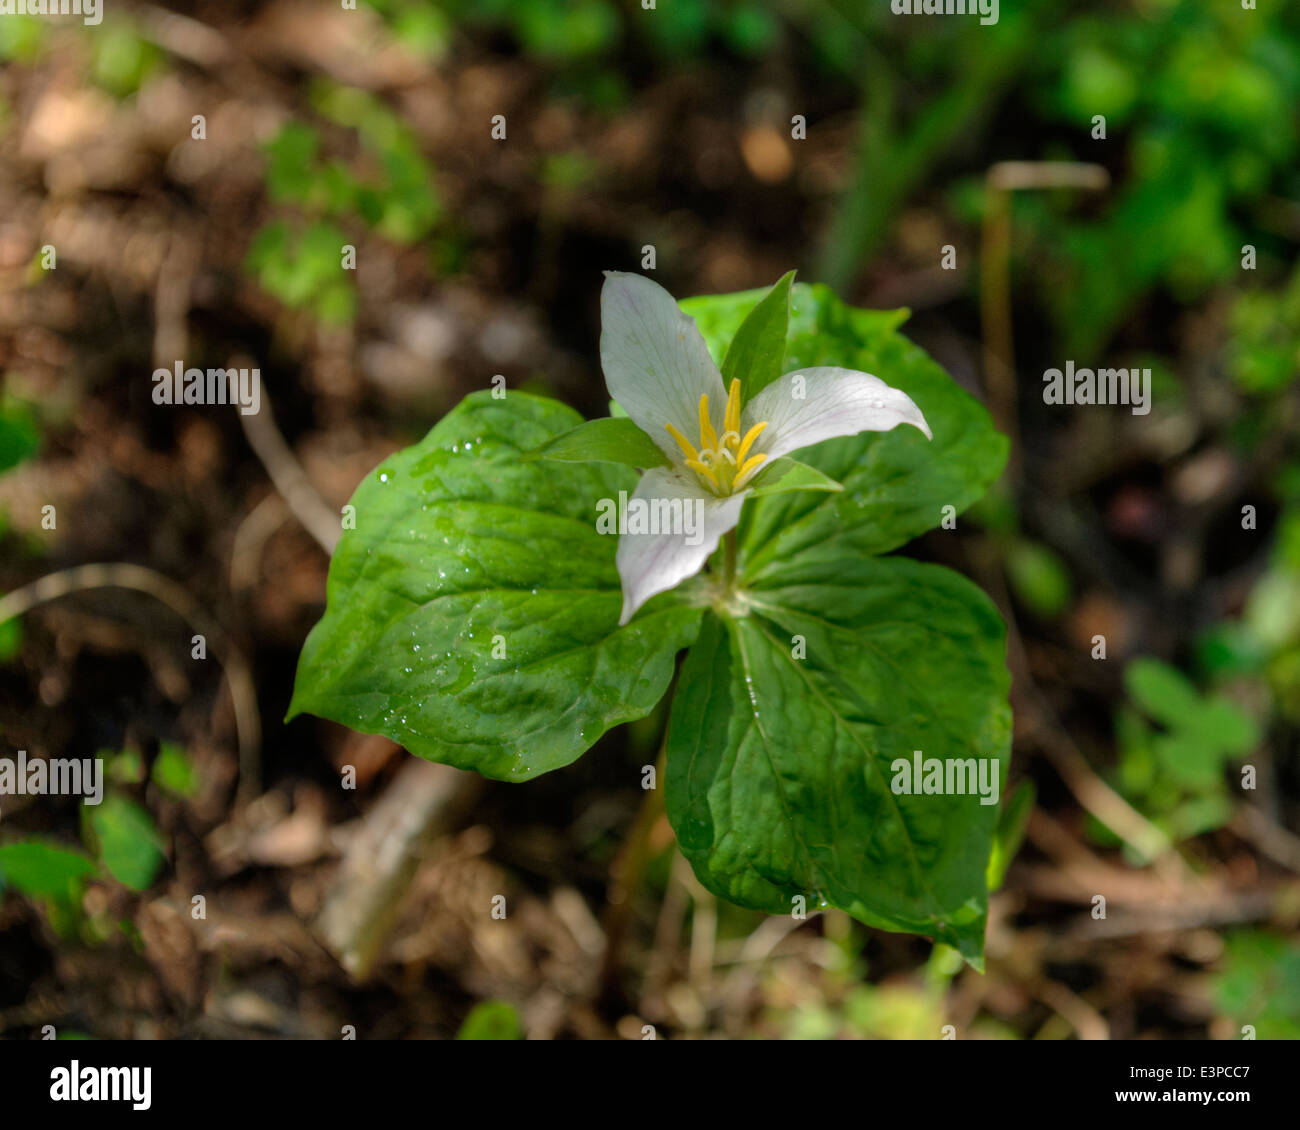 The Trillium (Trillium Ovatum) is a very common plant west of the Cascades crest in the Pacific Northwest. Stock Photo